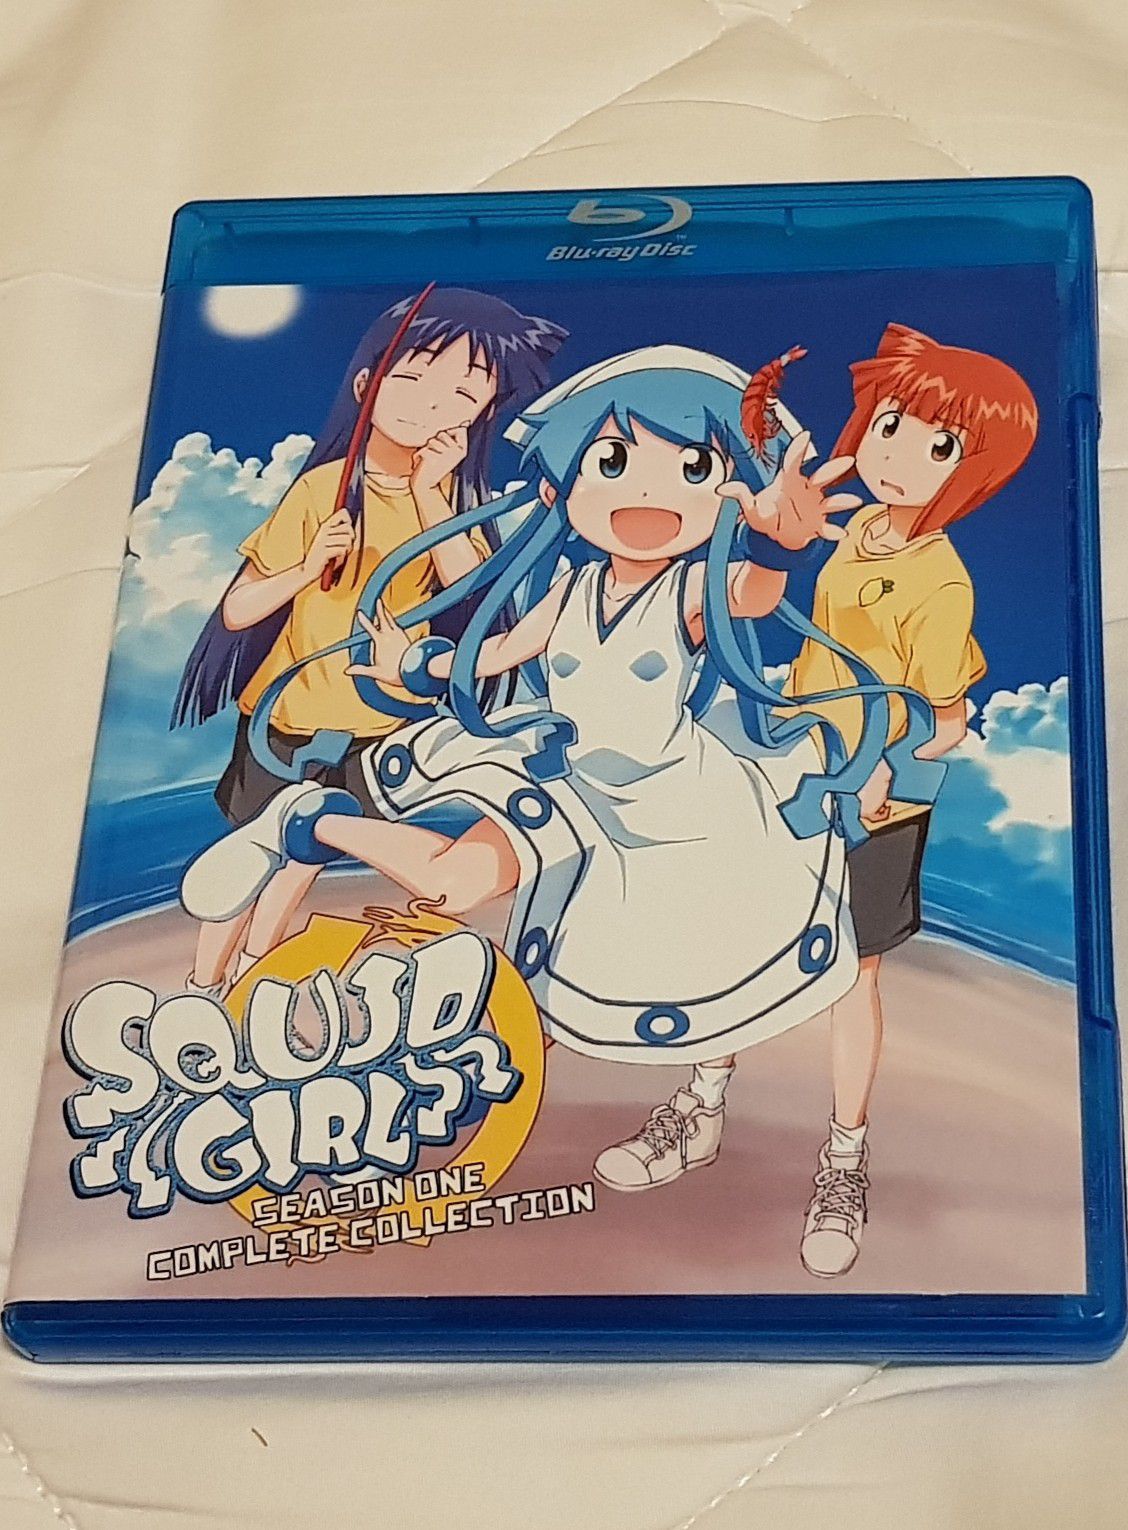 Squid Girl Season One complete collection (Blu-ray)